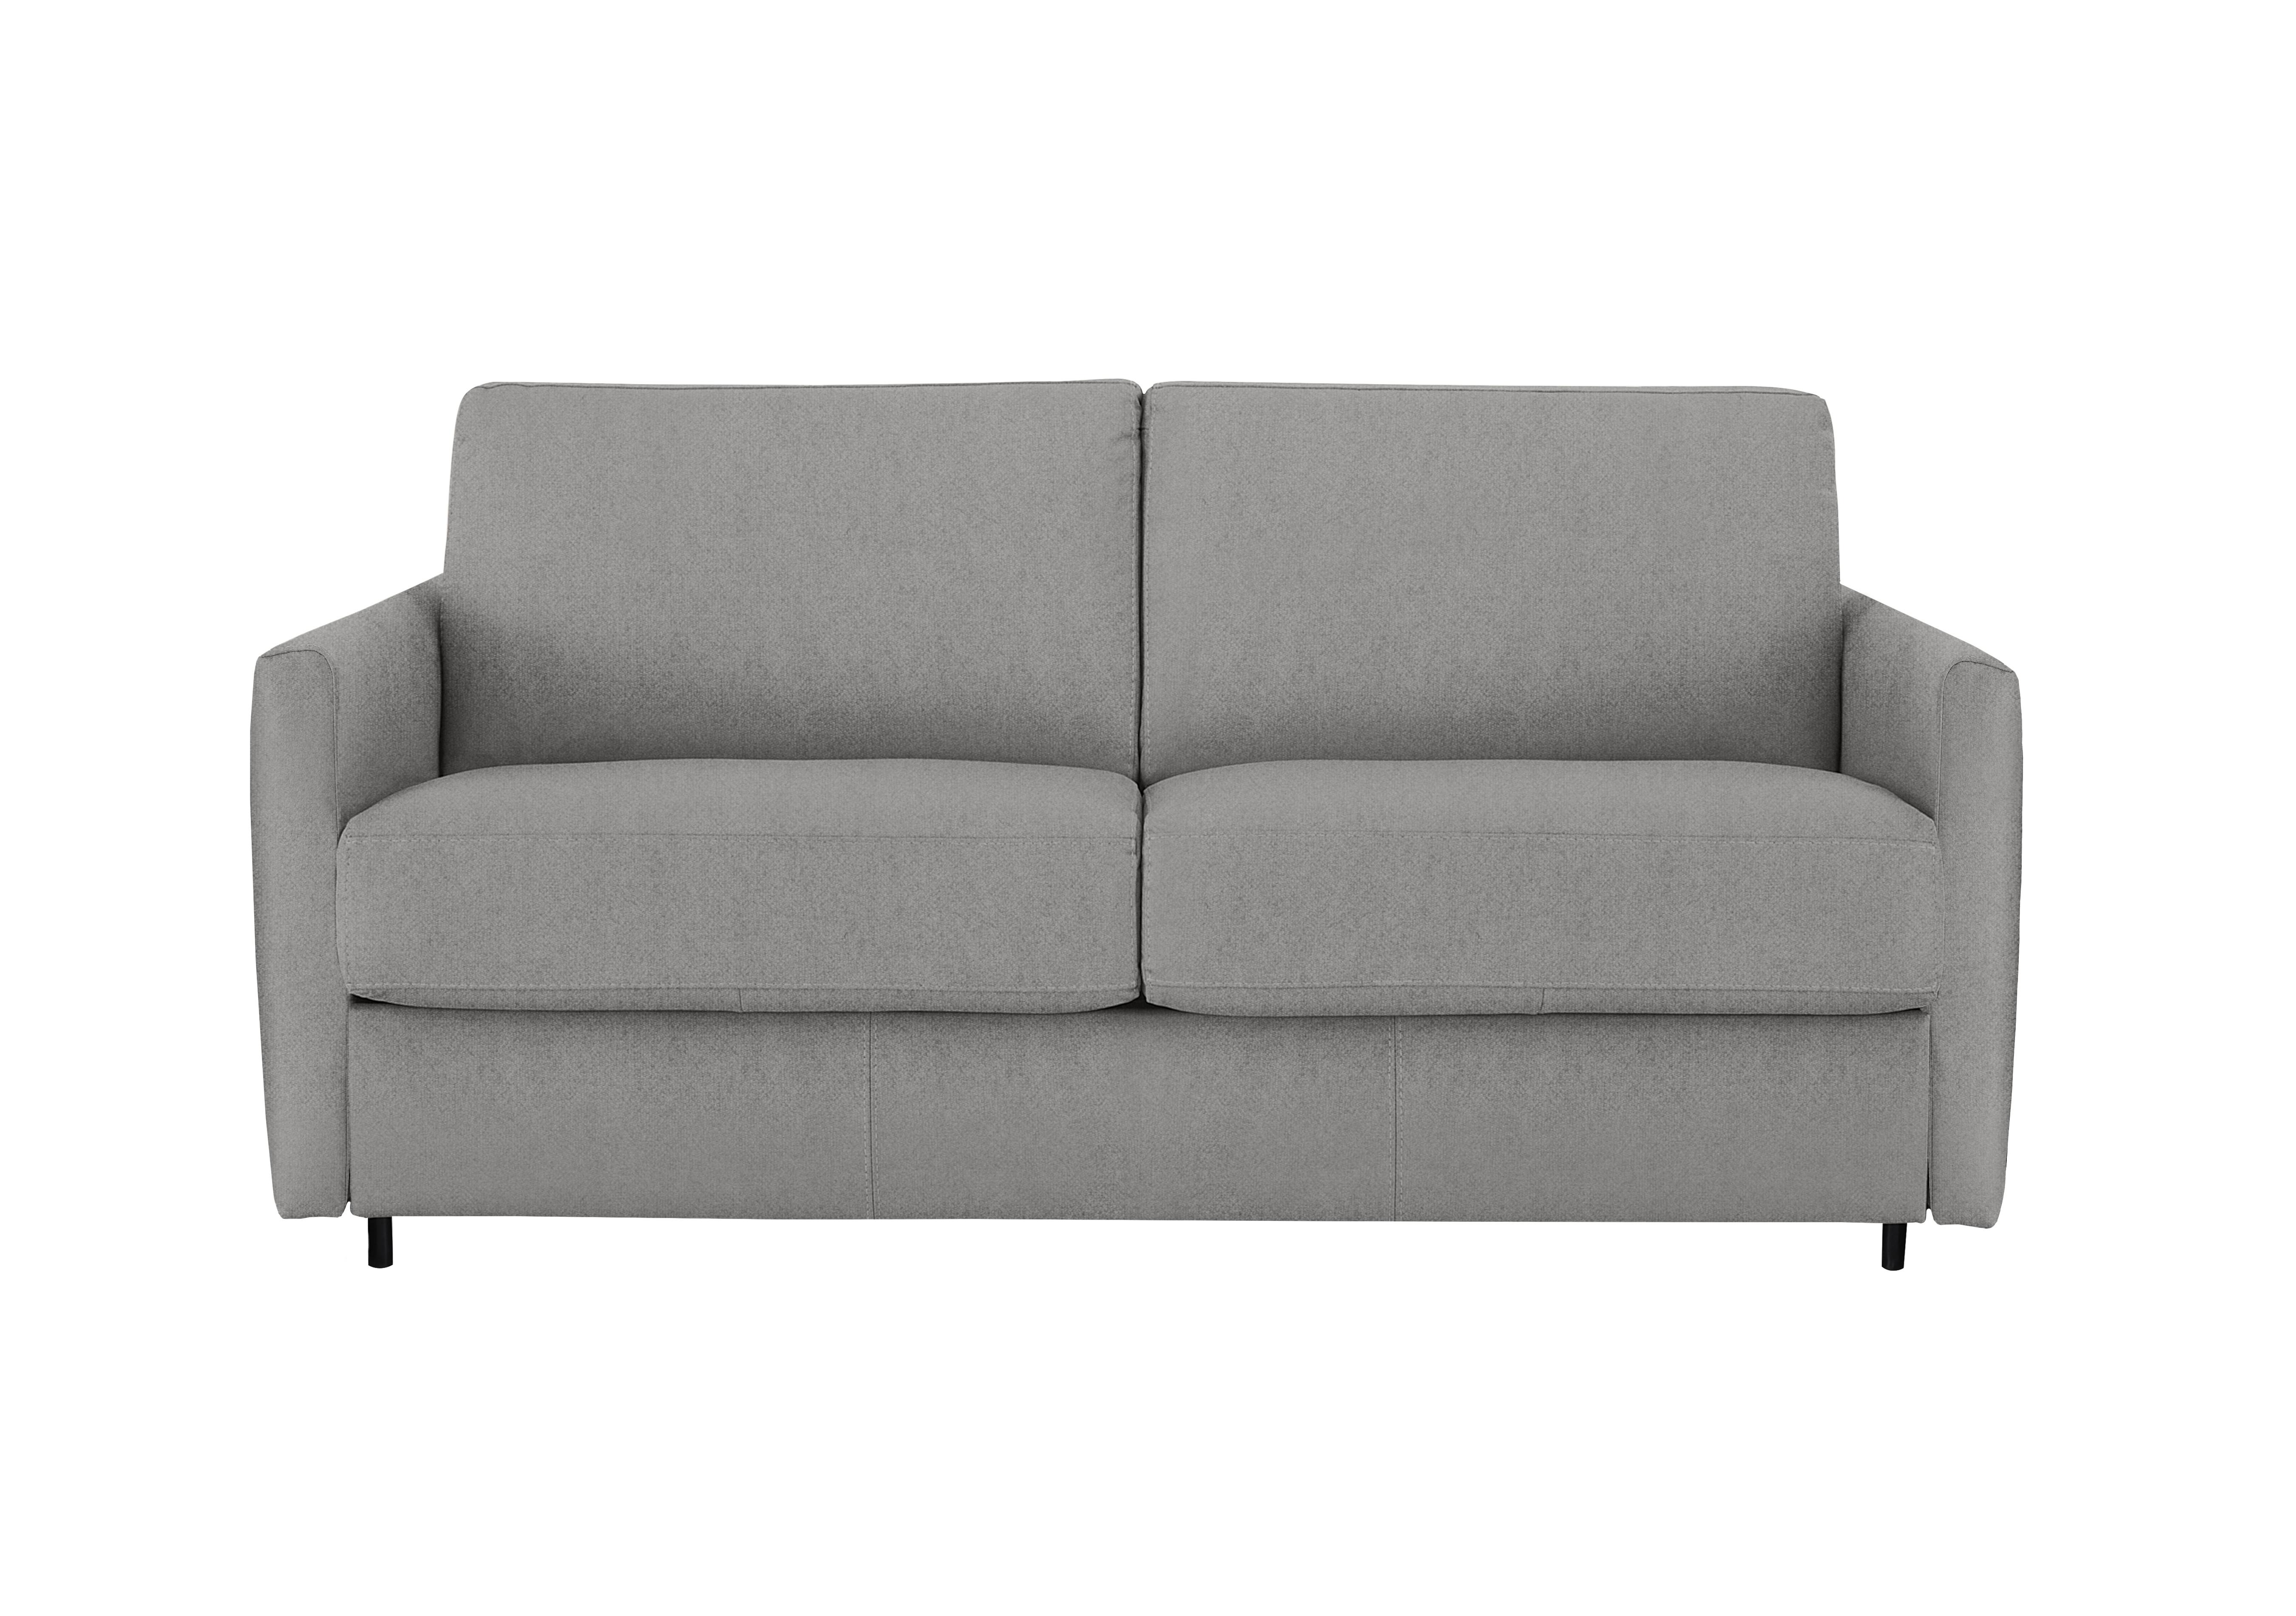 Alcova 2.5 Seater Fabric Sofa Bed with Slim Arms in Fuente Ash on Furniture Village